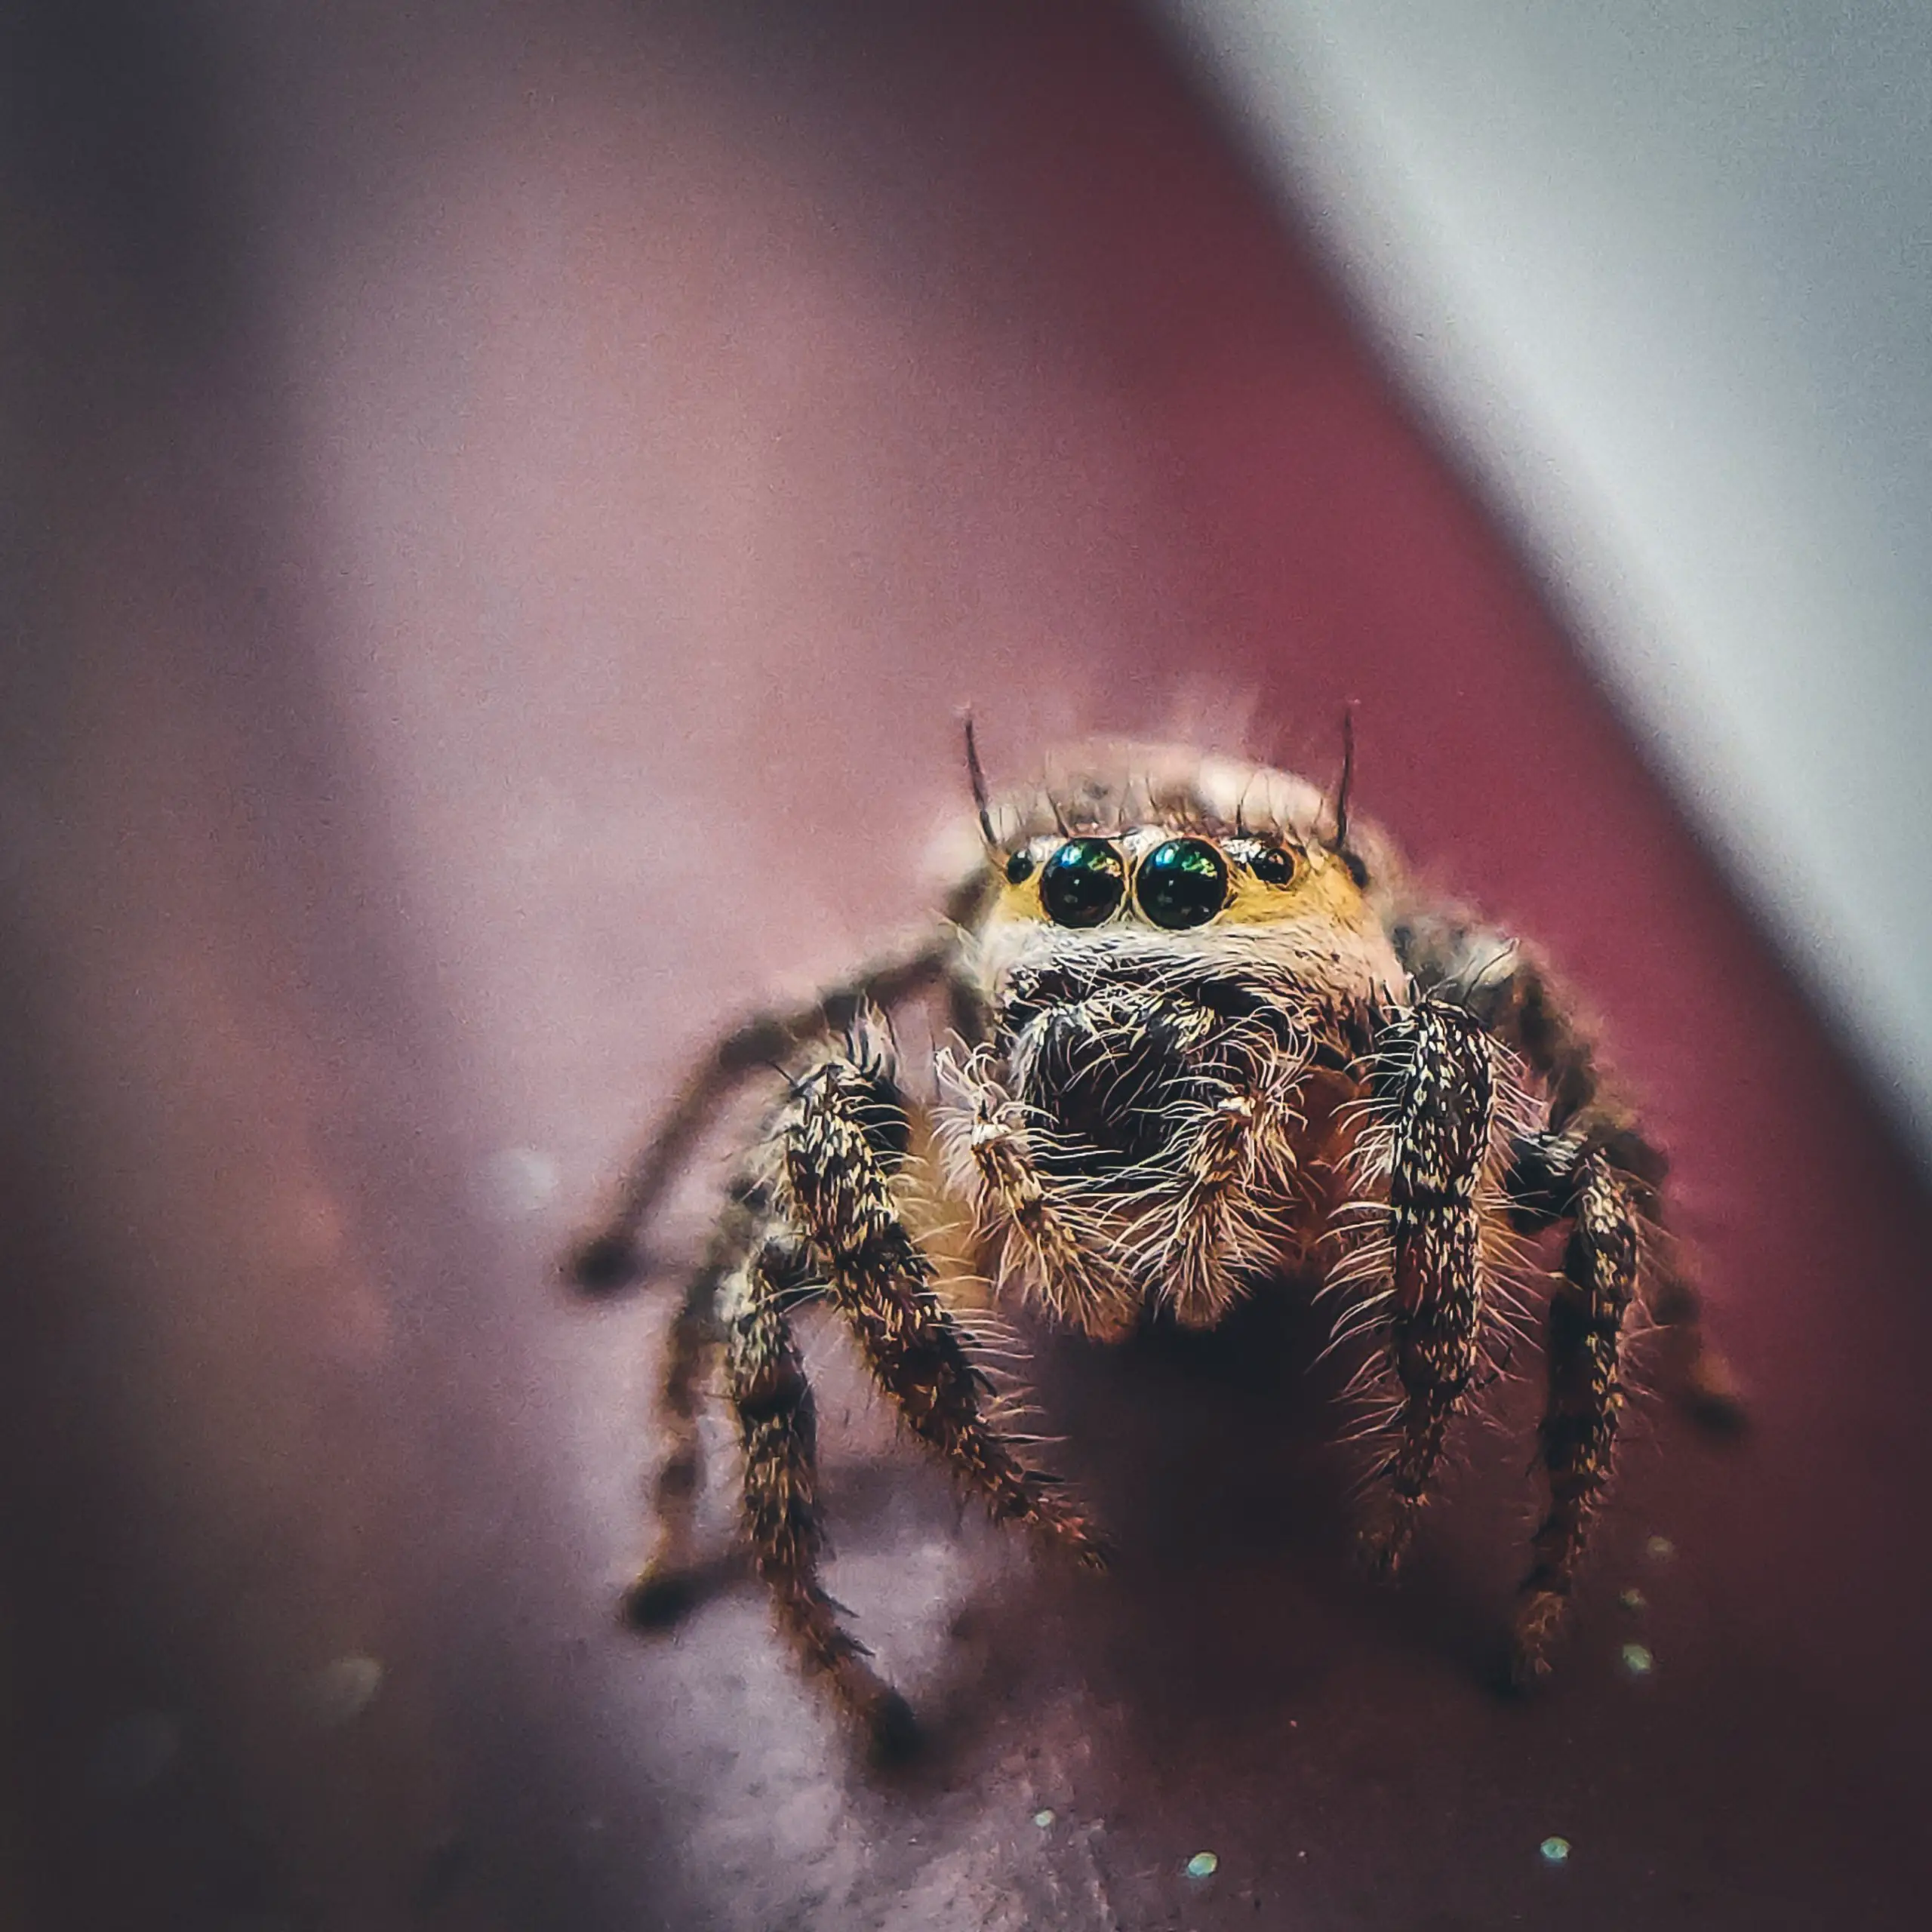 Close up image of a jumping spider